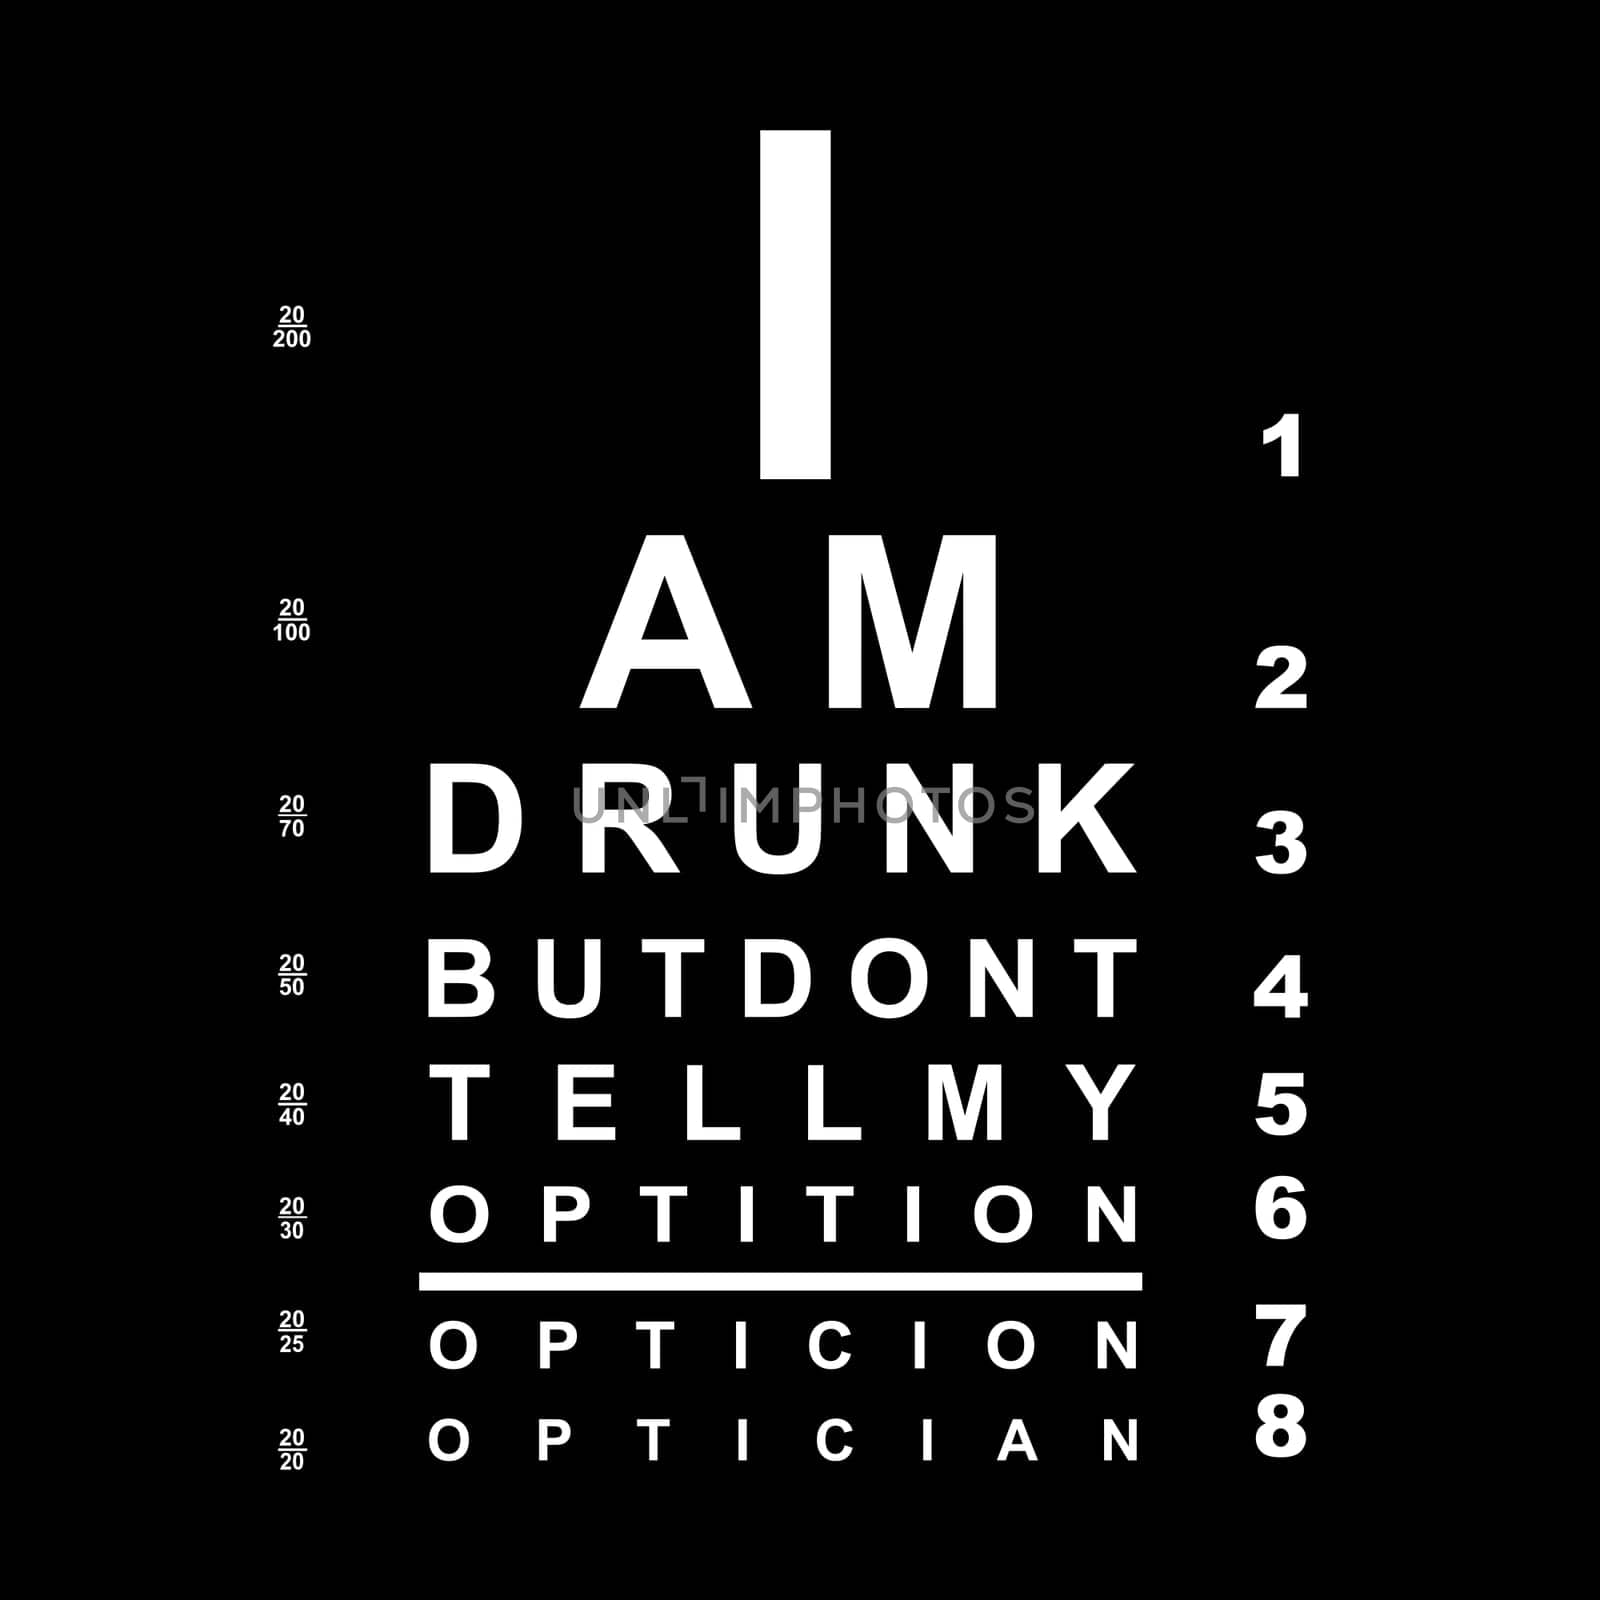 A funny drunk eye chart with the misspelling of optician.